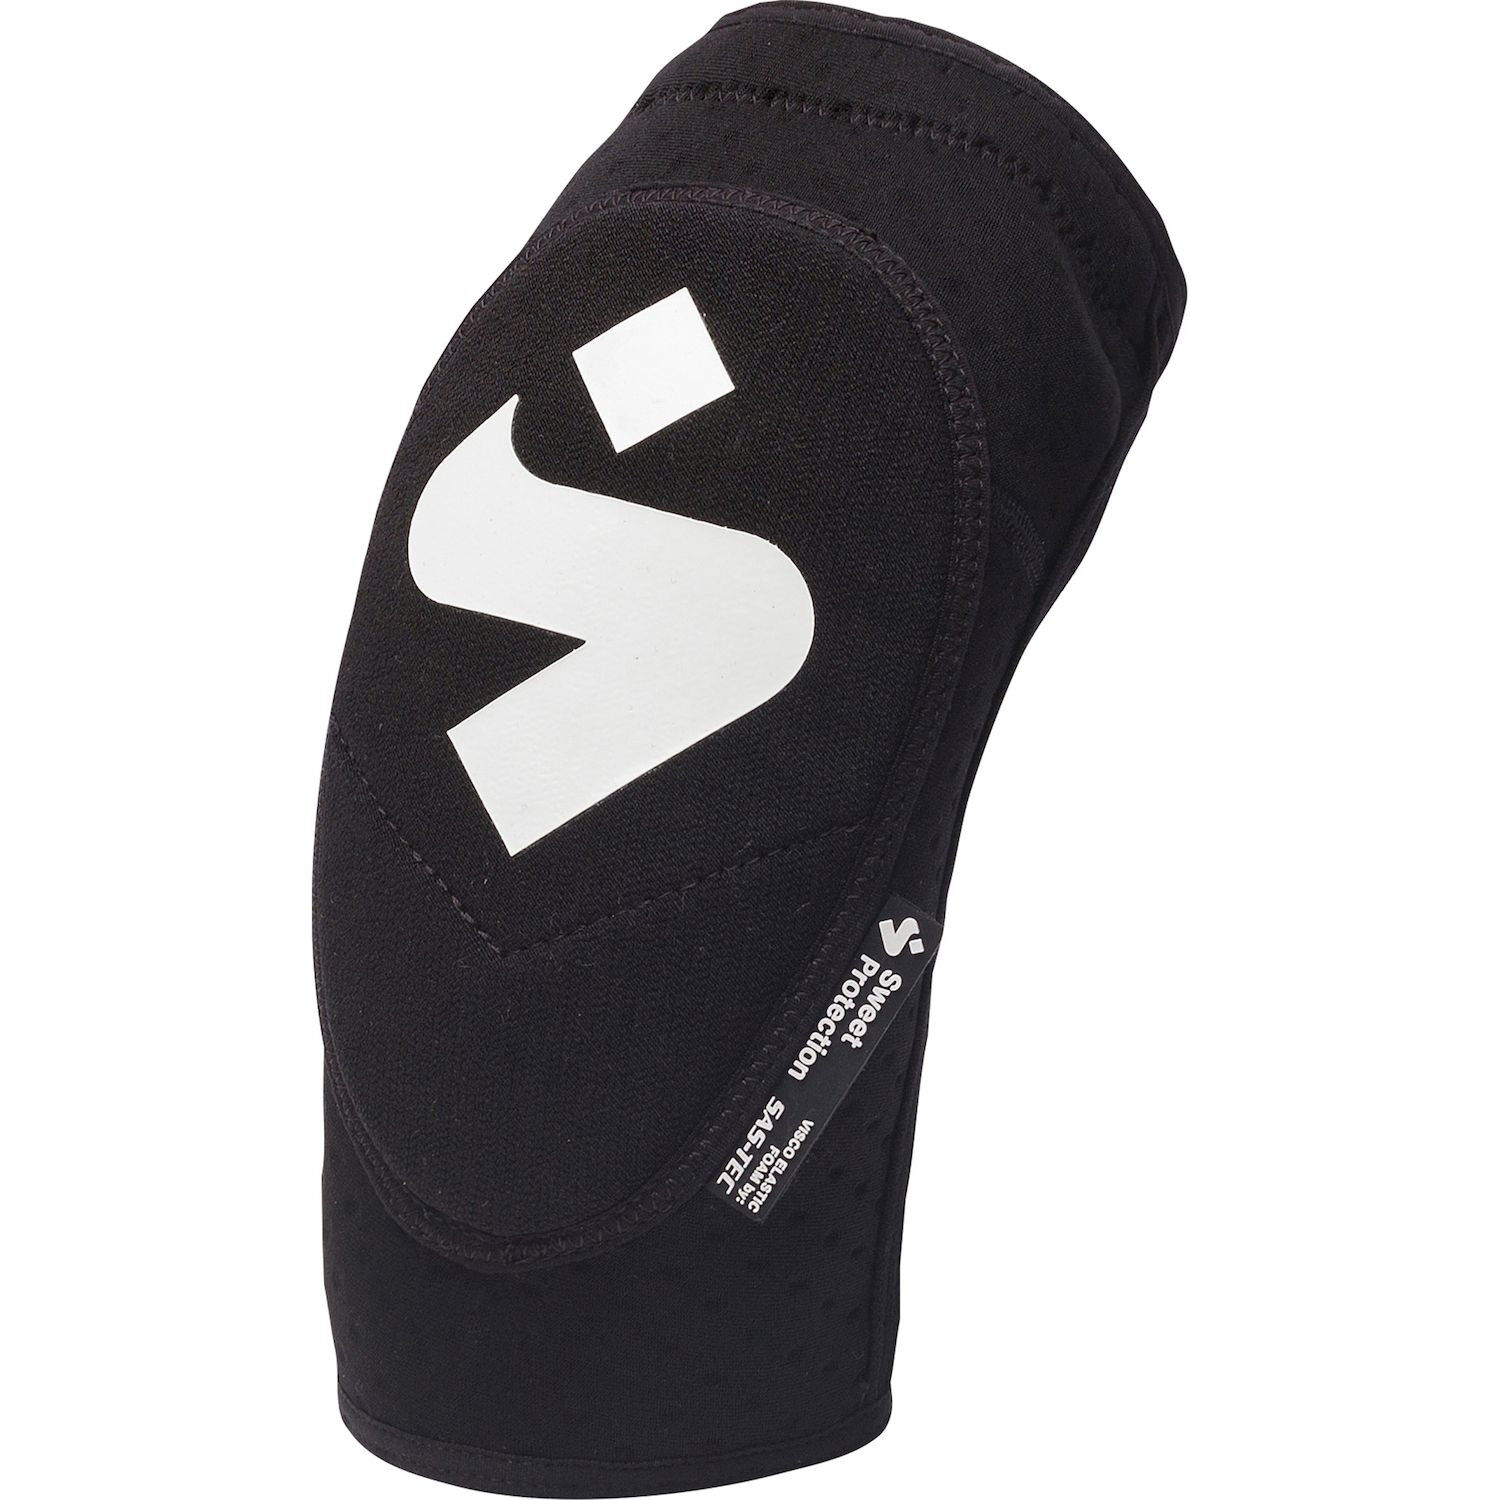 Sweet Protection Elbow Guards - Albuebeskyttere